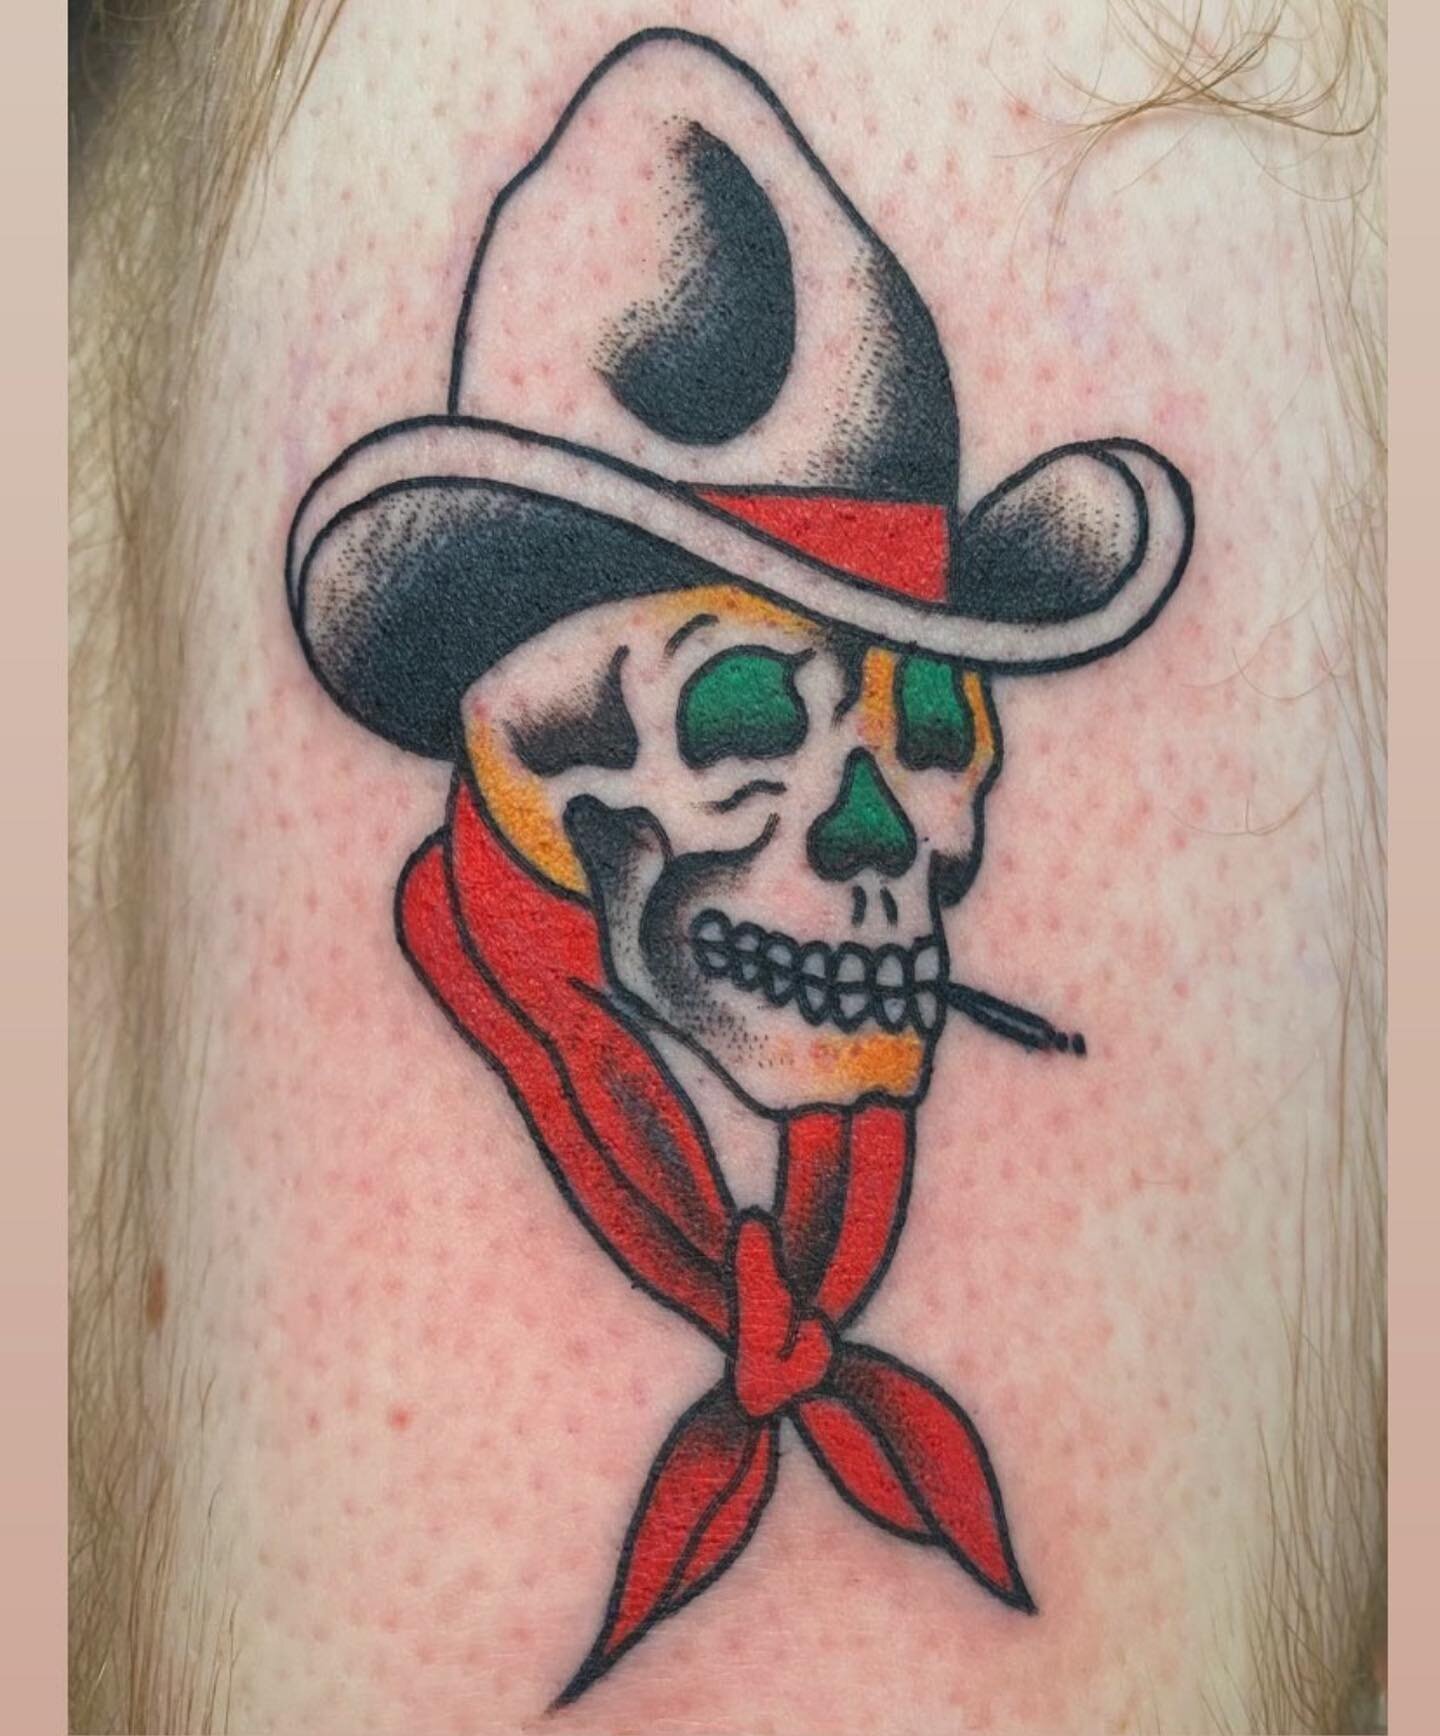 Done by @jinxproof1996 🤠